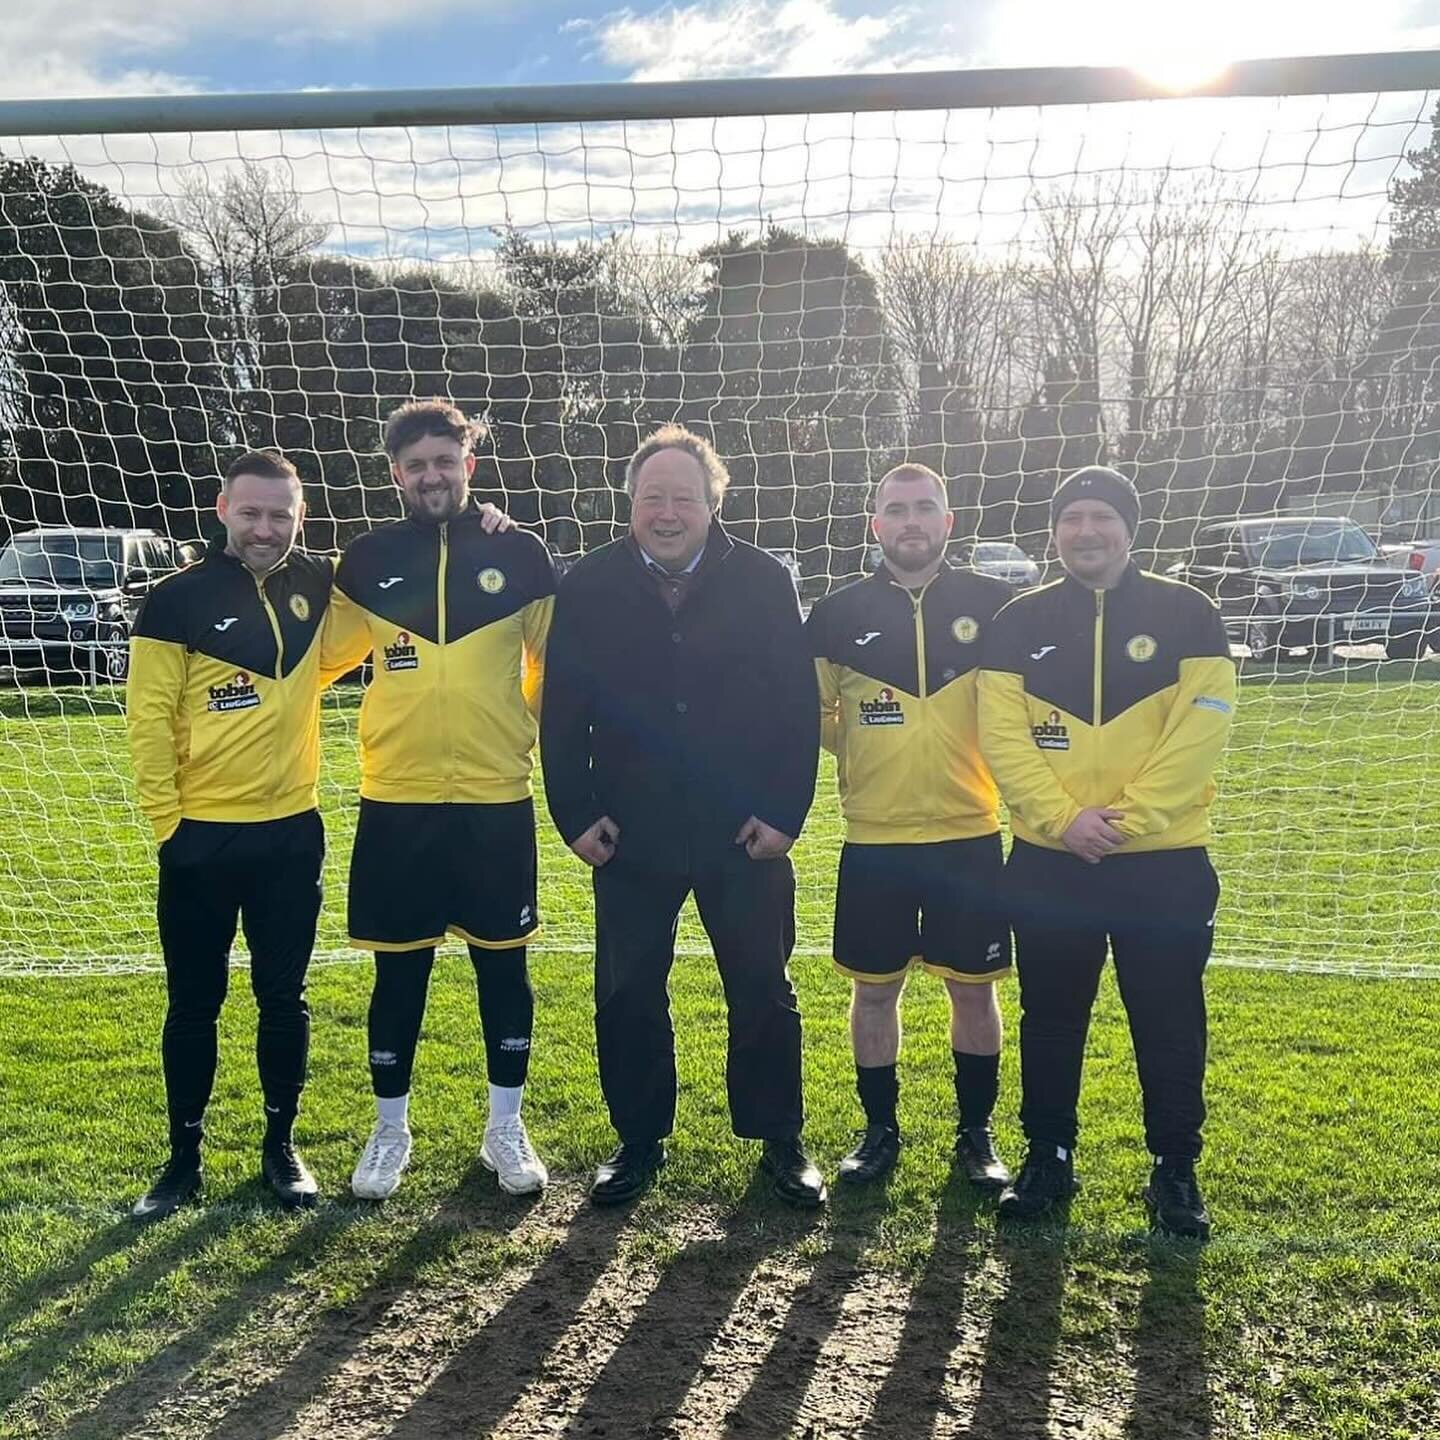 Tobin Plant LTD are proud to have supported Southwold Town FC with 20 training tracksuits as part of our community engagement. STFC was founded in 1895 and so happens to be one of the oldest clubs in our region. They are currently top of their league